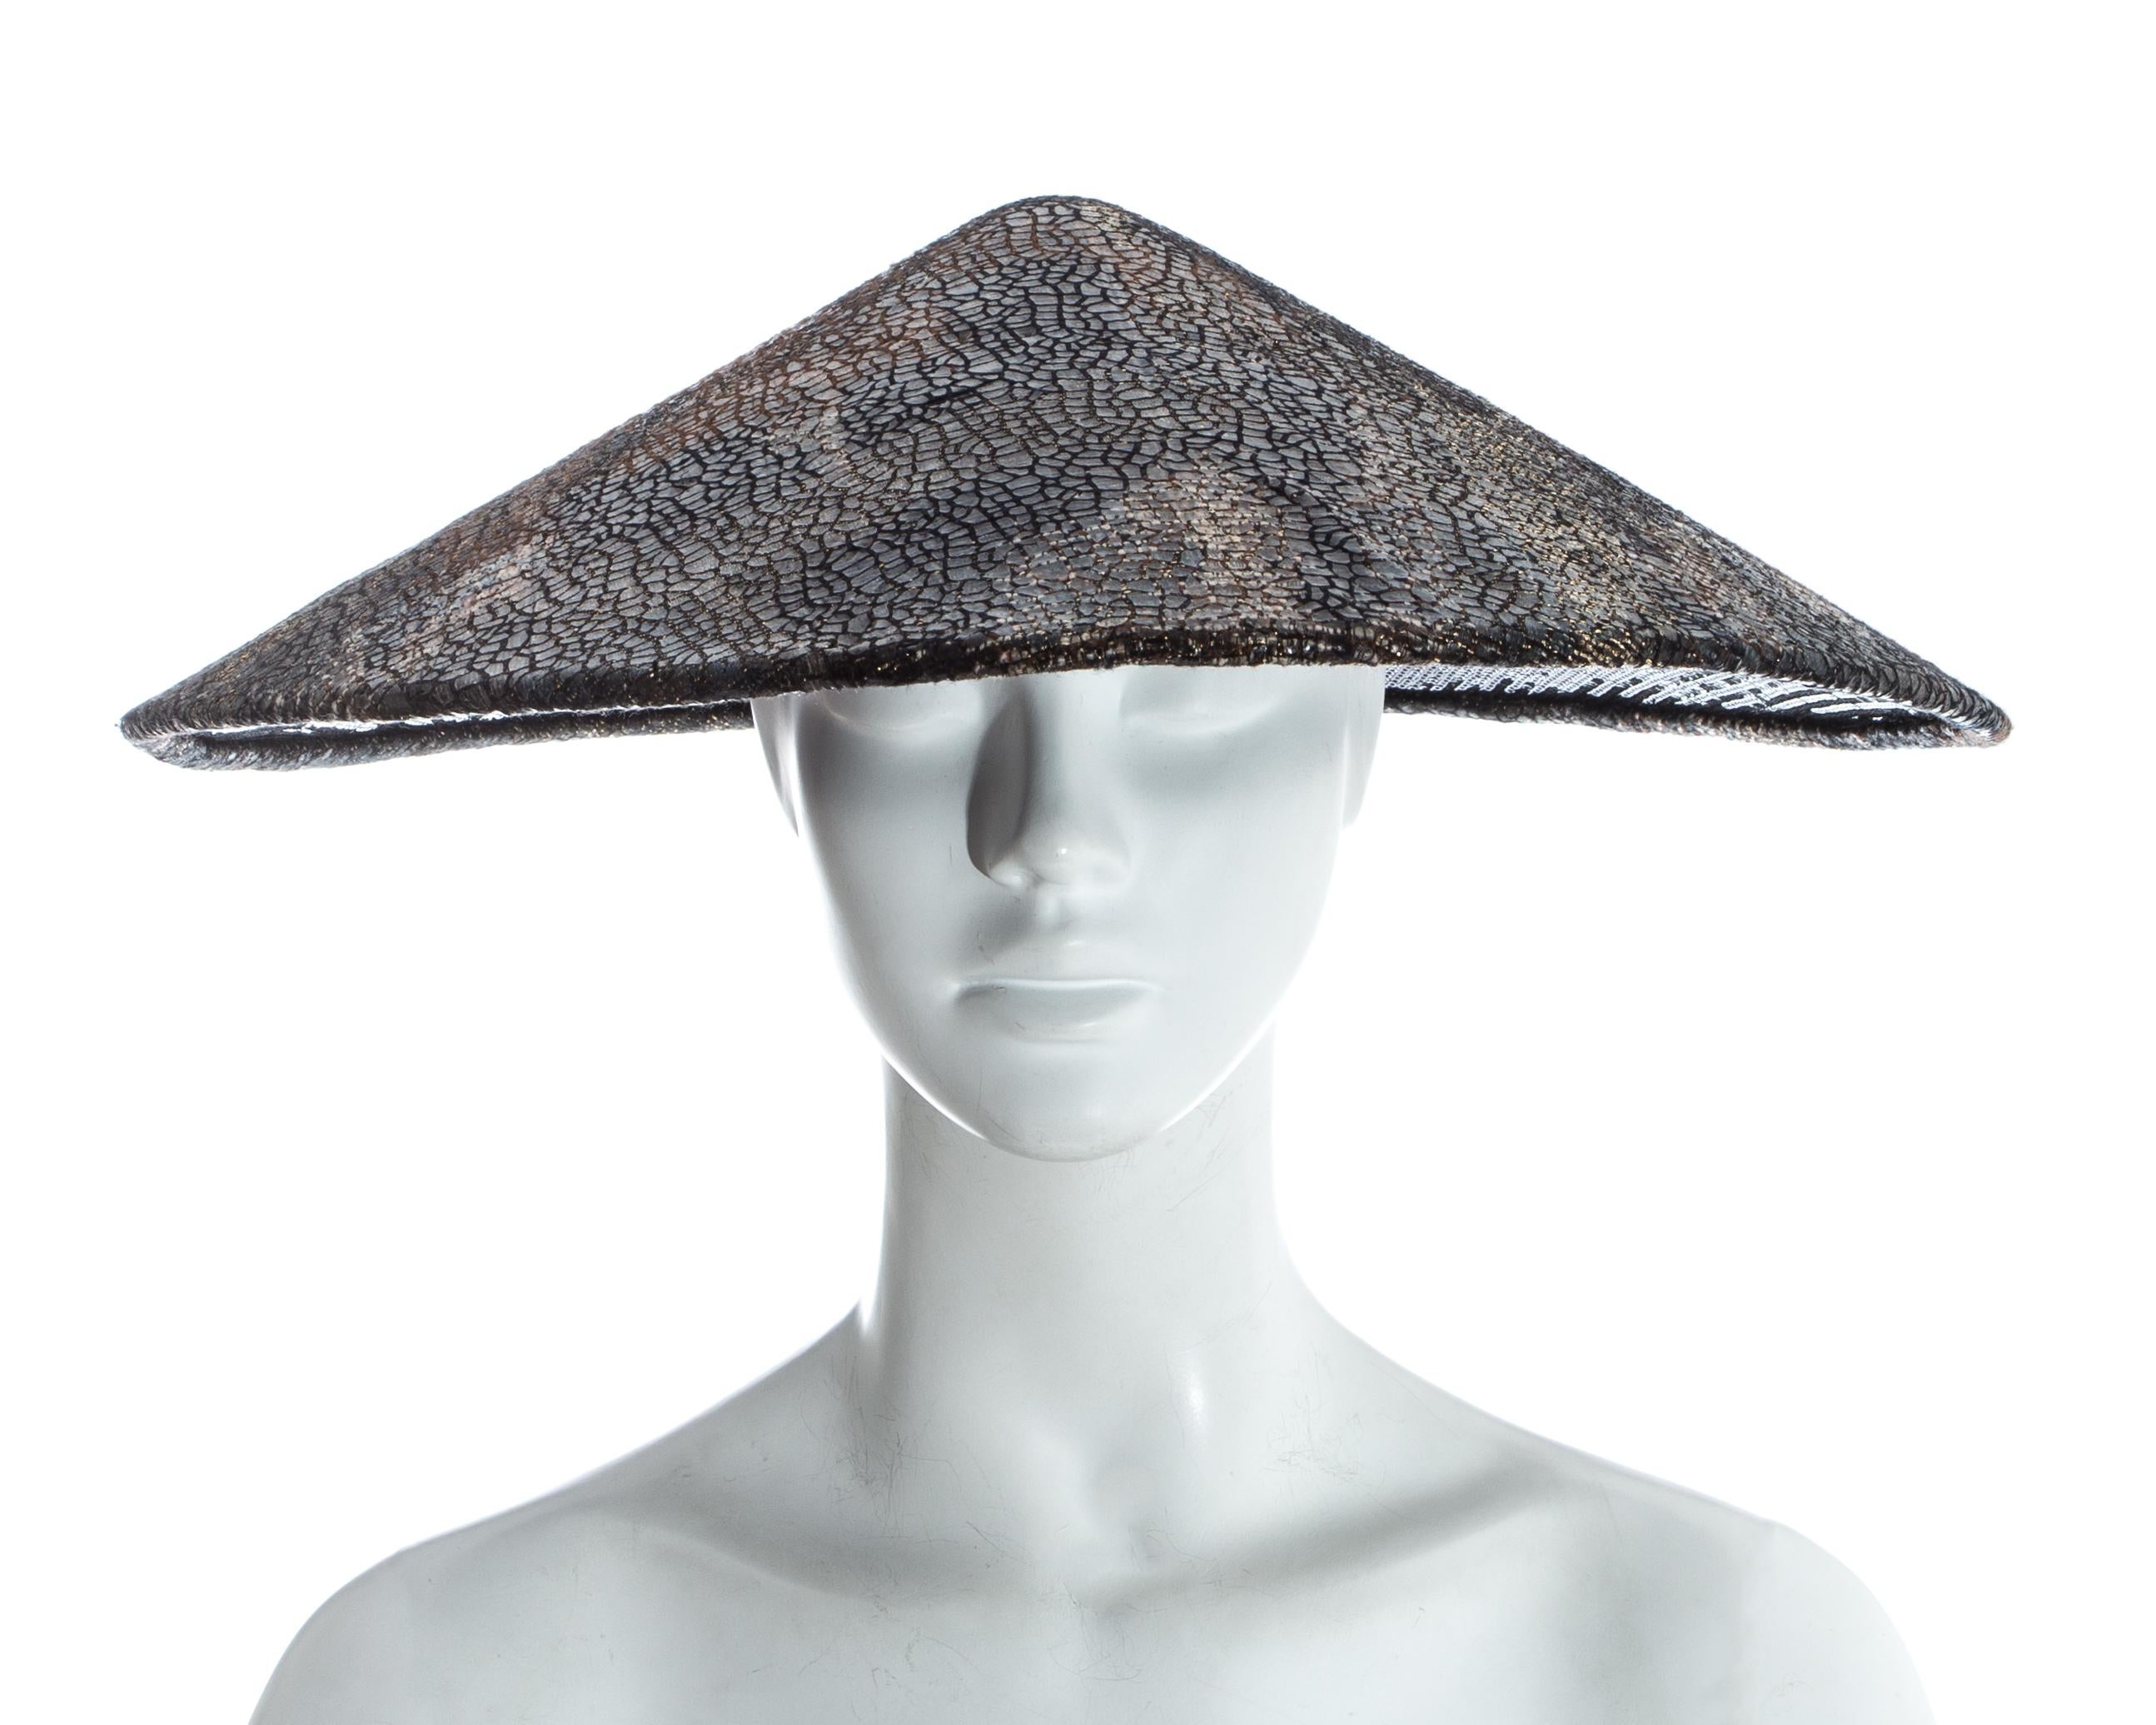 Chanel by Karl Lagerfeld, 'Paris-Shangai' bronze sequin conical hat, pf 2010 For Sale